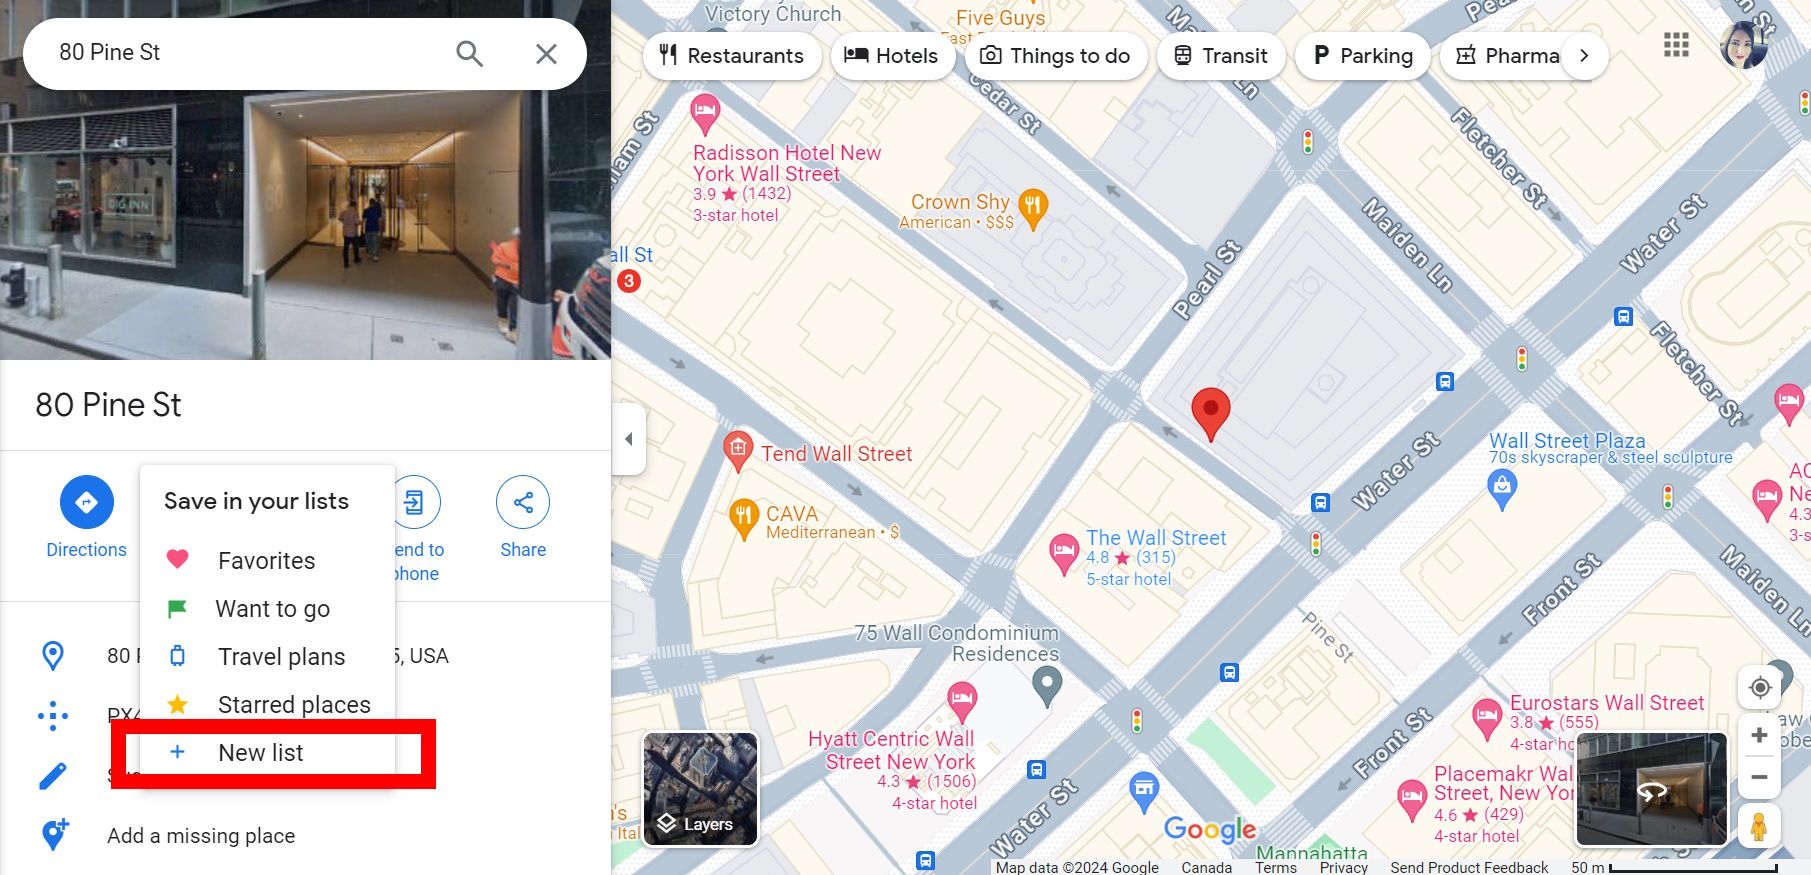 red rectangle outline over new list option in google maps web under save in your lists